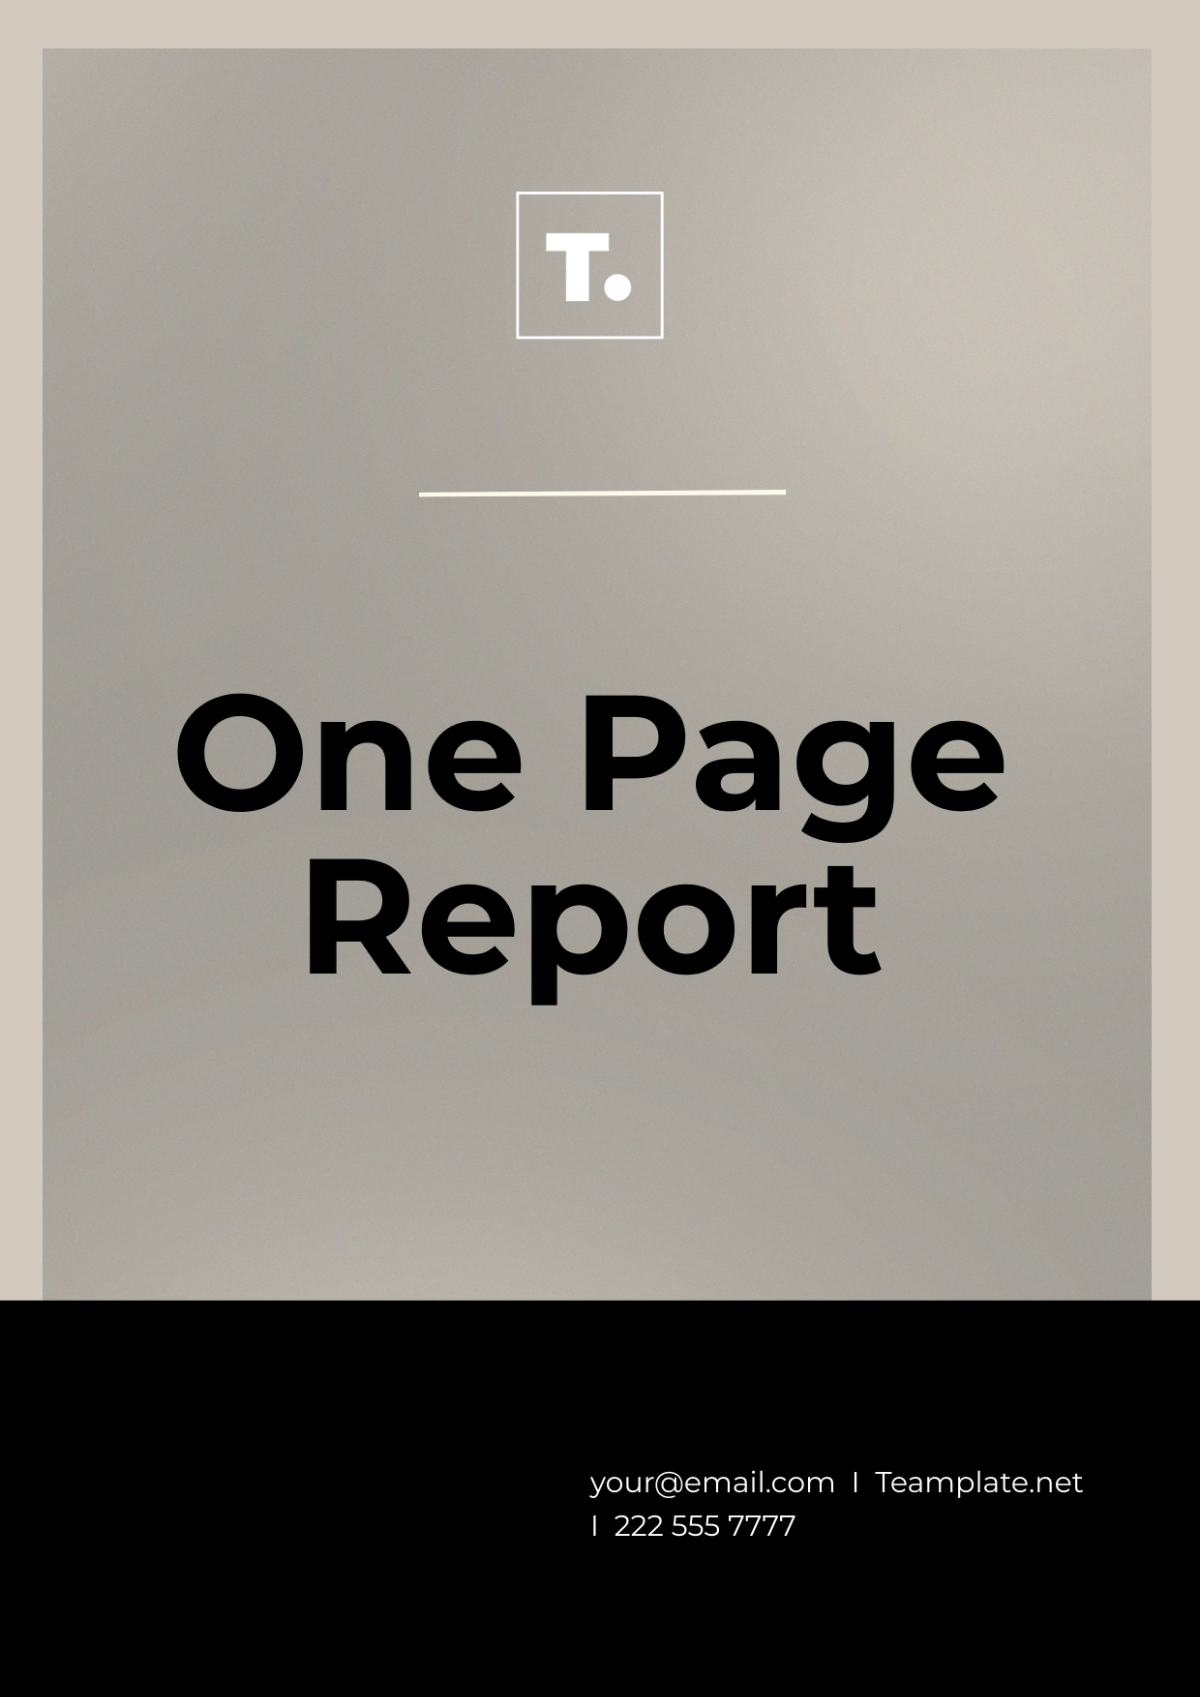 One Page Report Template